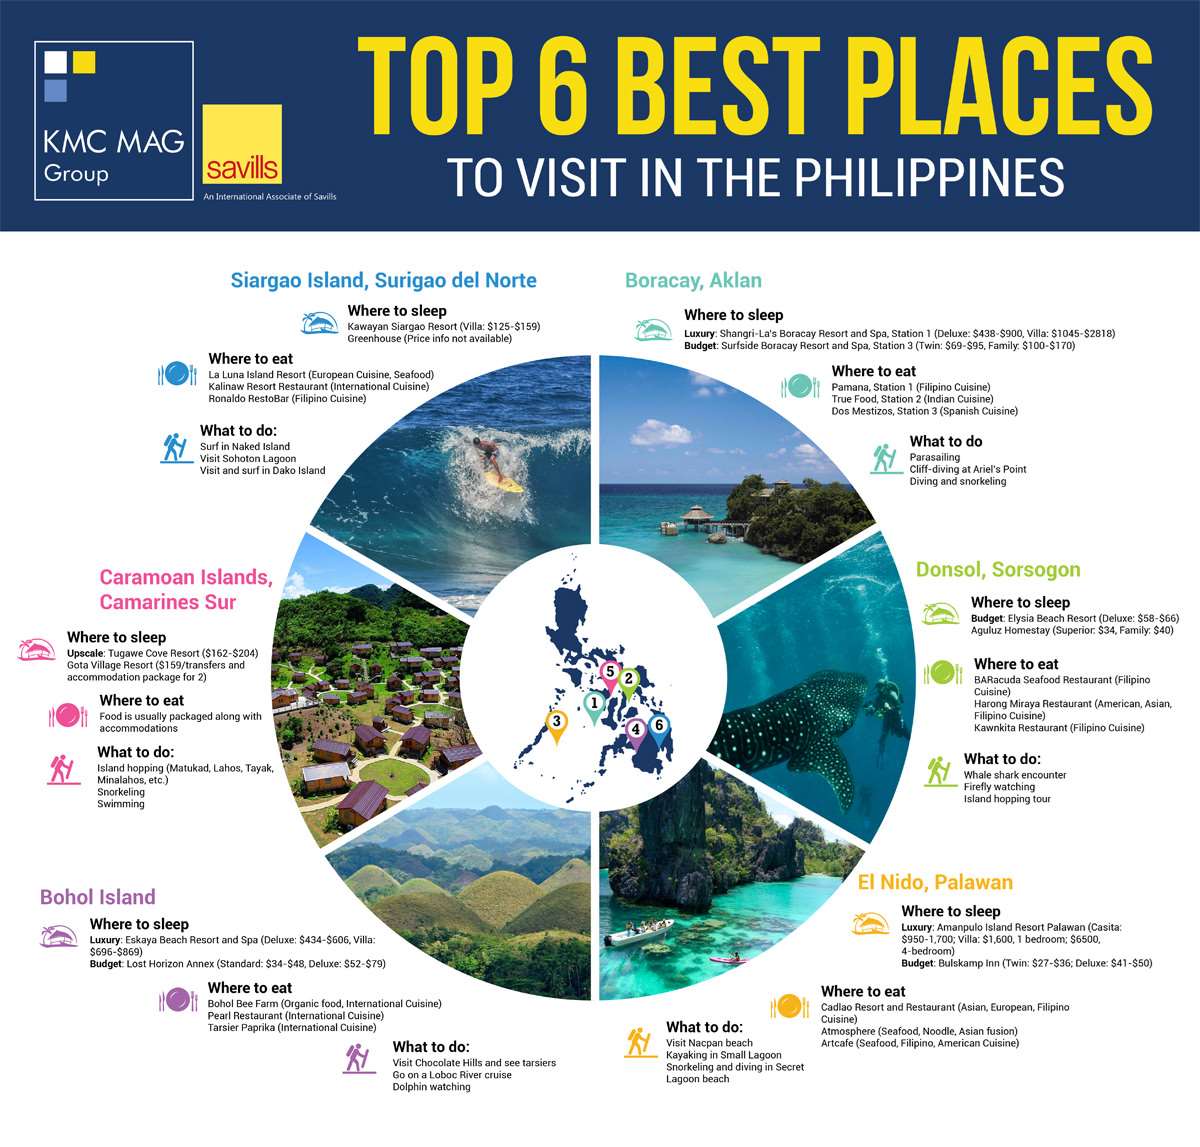 tourism sector in philippines